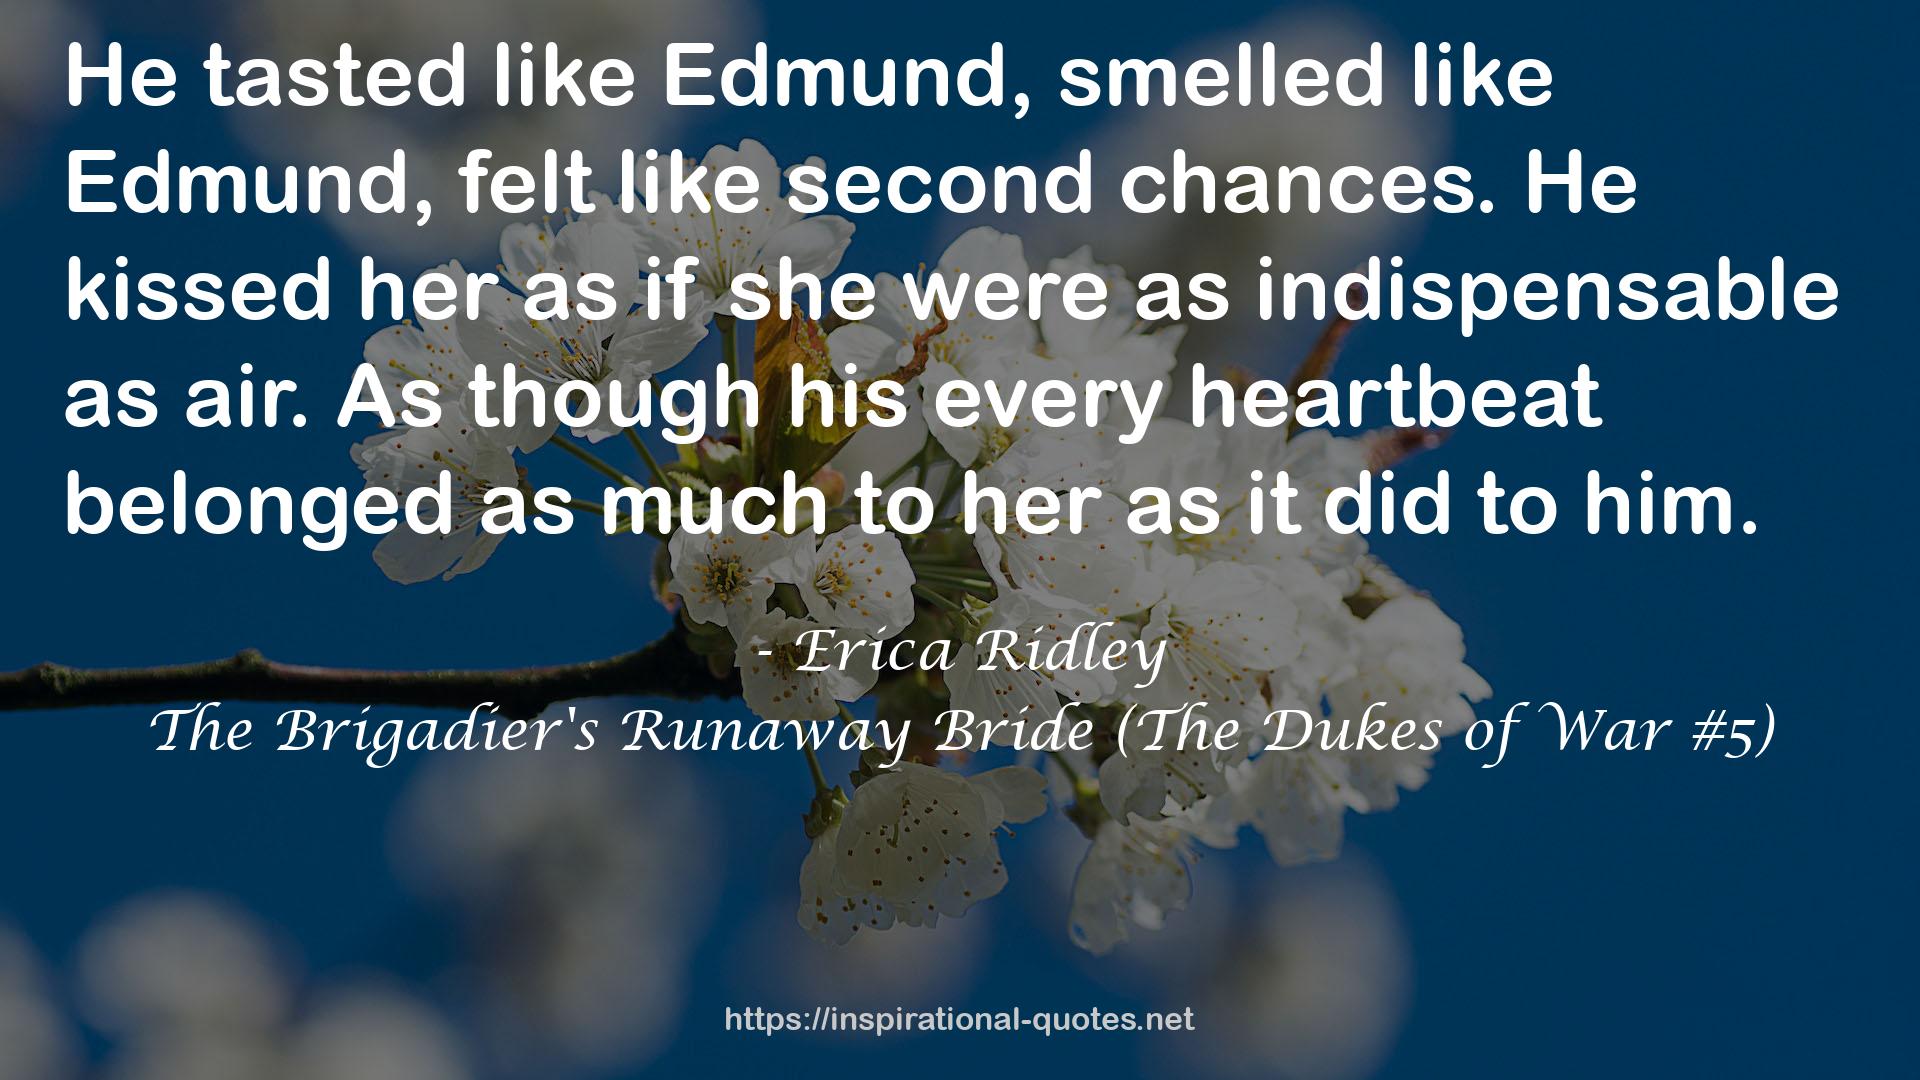 The Brigadier's Runaway Bride (The Dukes of War #5) QUOTES